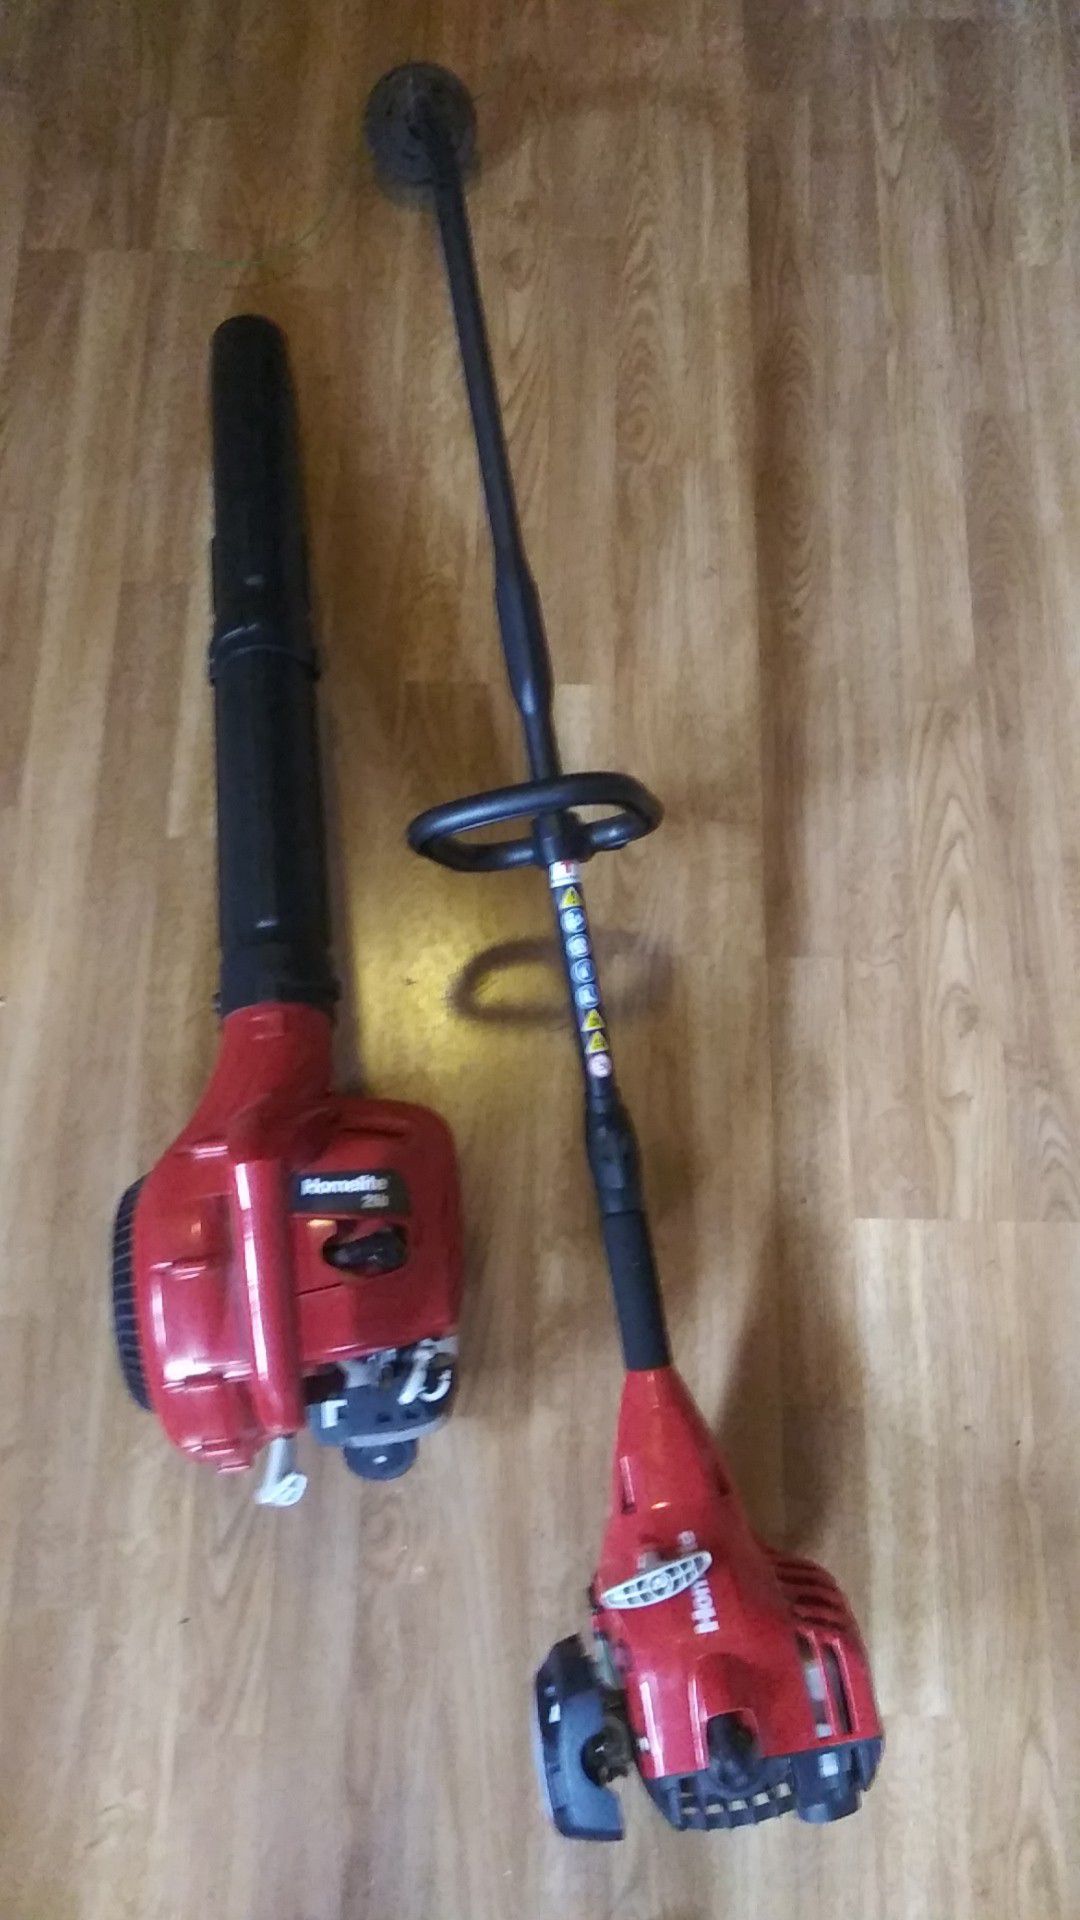 Homelite gas powered weed eater + blower combo practically brand new